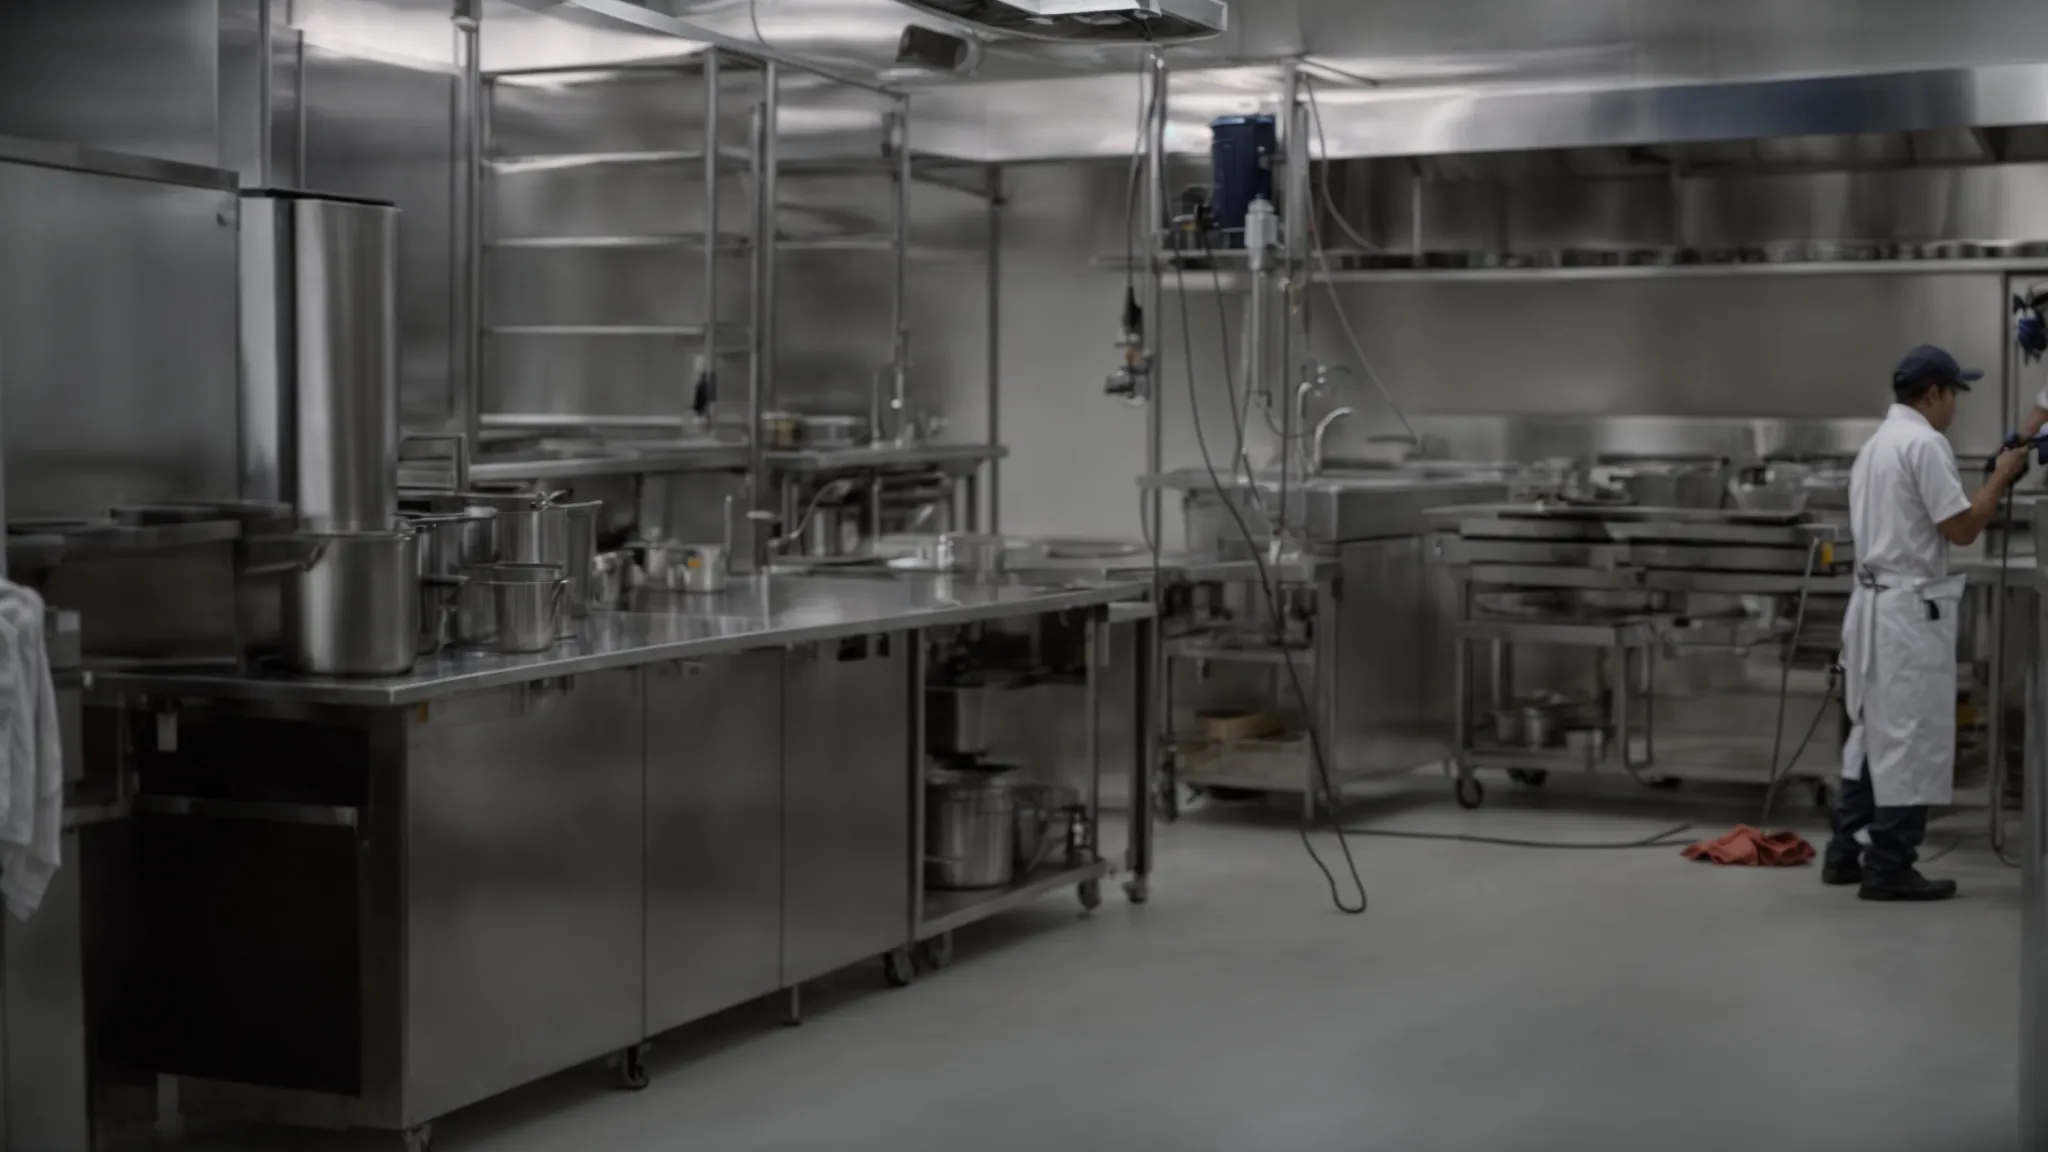 a professional cleaning team is setting up their equipment in a commercial kitchen, preparing for an exhaust system cleaning.